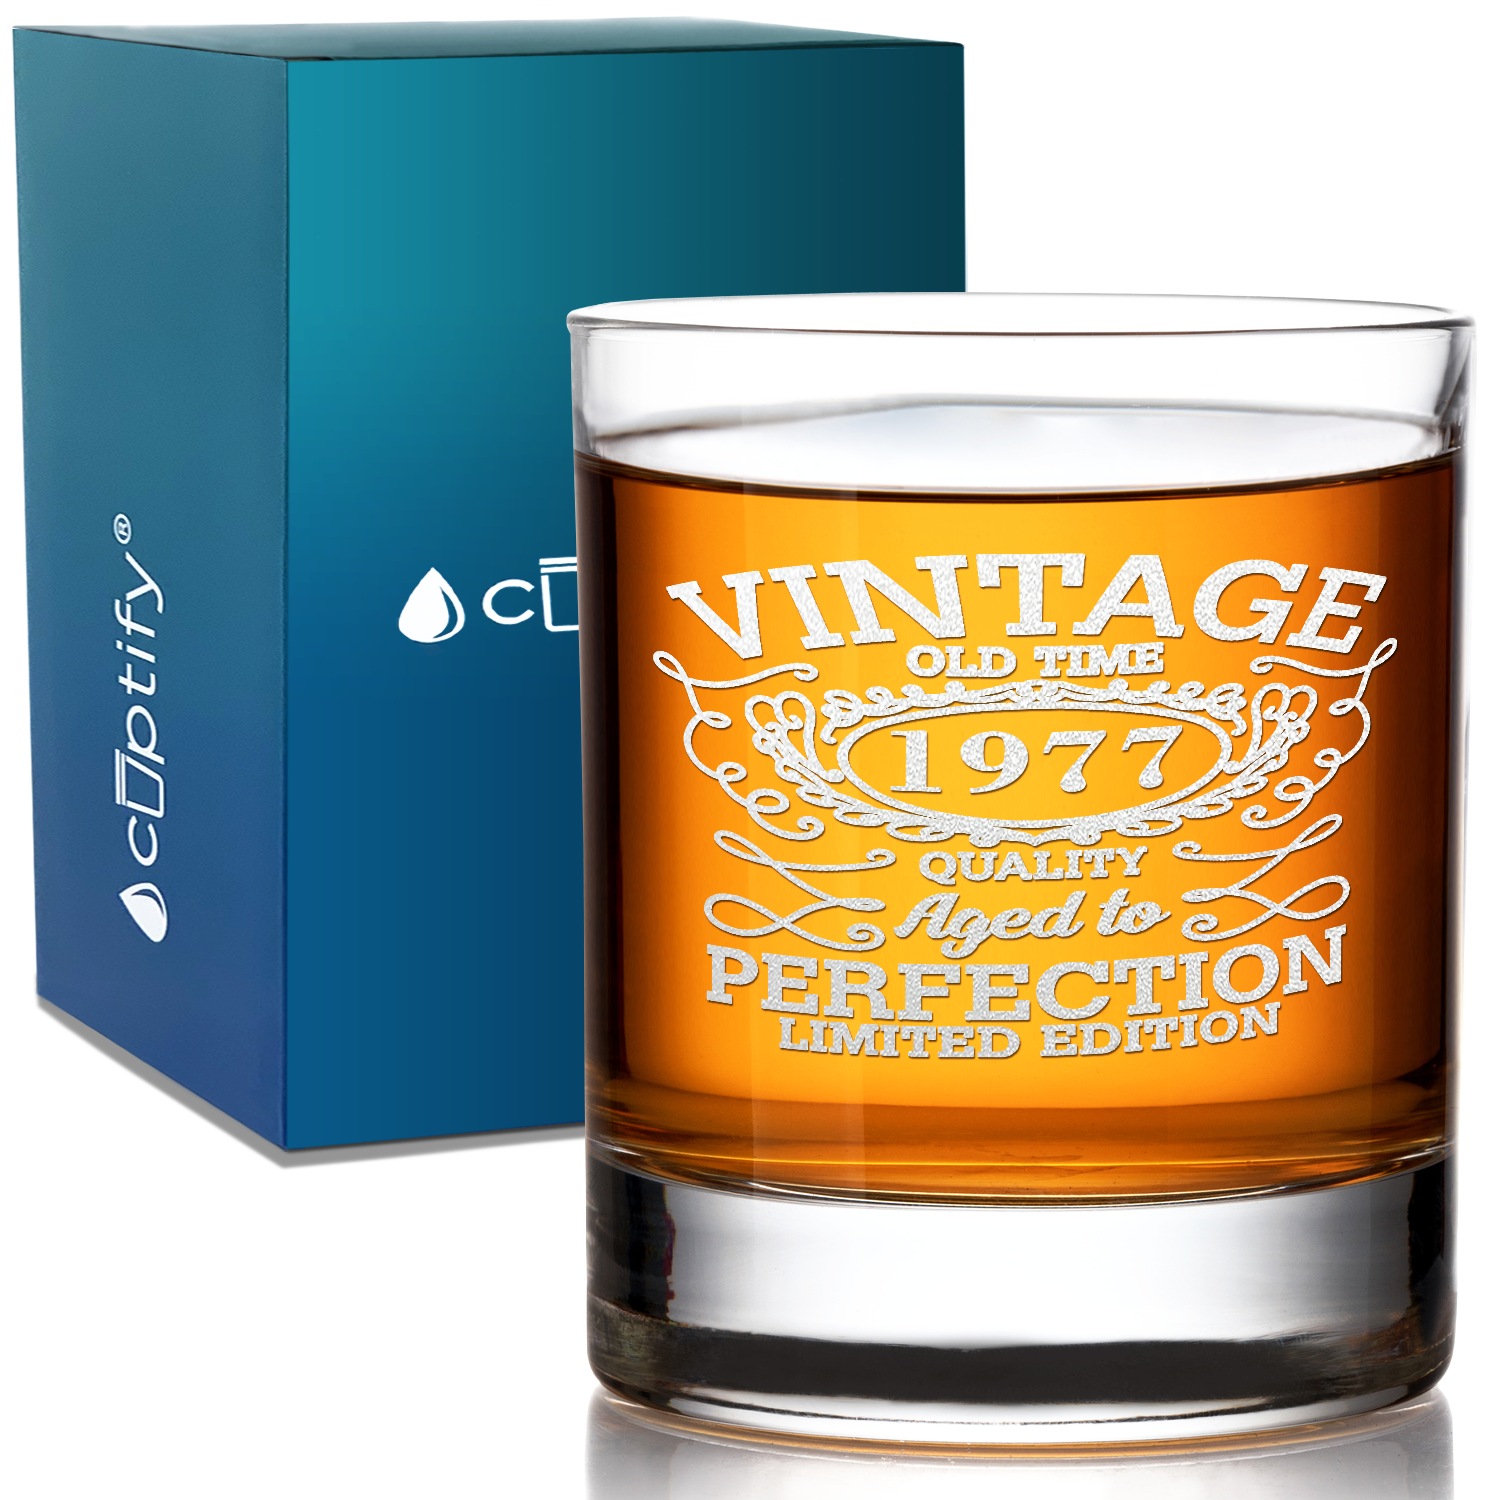 44th Birthday Vintage 44 Years Old Time 1977 Quality Laser Engraved 10.25oz Old Fashion Glass